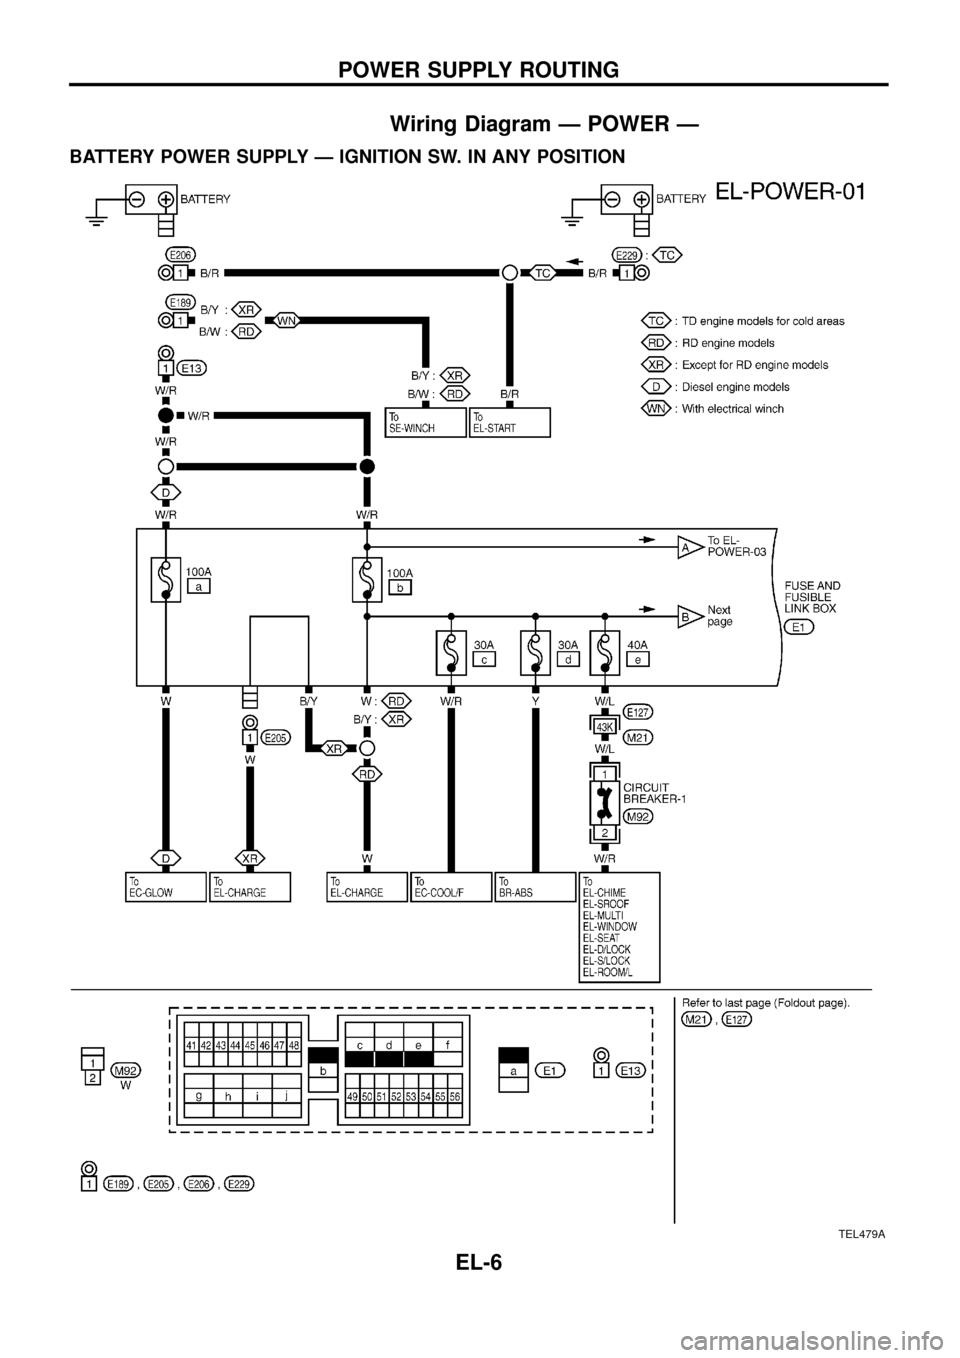 NISSAN PATROL 1998 Y61 / 5.G Electrical System Workshop Manual Wiring Diagram Ð POWER Ð
BATTERY POWER SUPPLY Ð IGNITION SW. IN ANY POSITION
TEL479A
POWER SUPPLY ROUTING
EL-6 